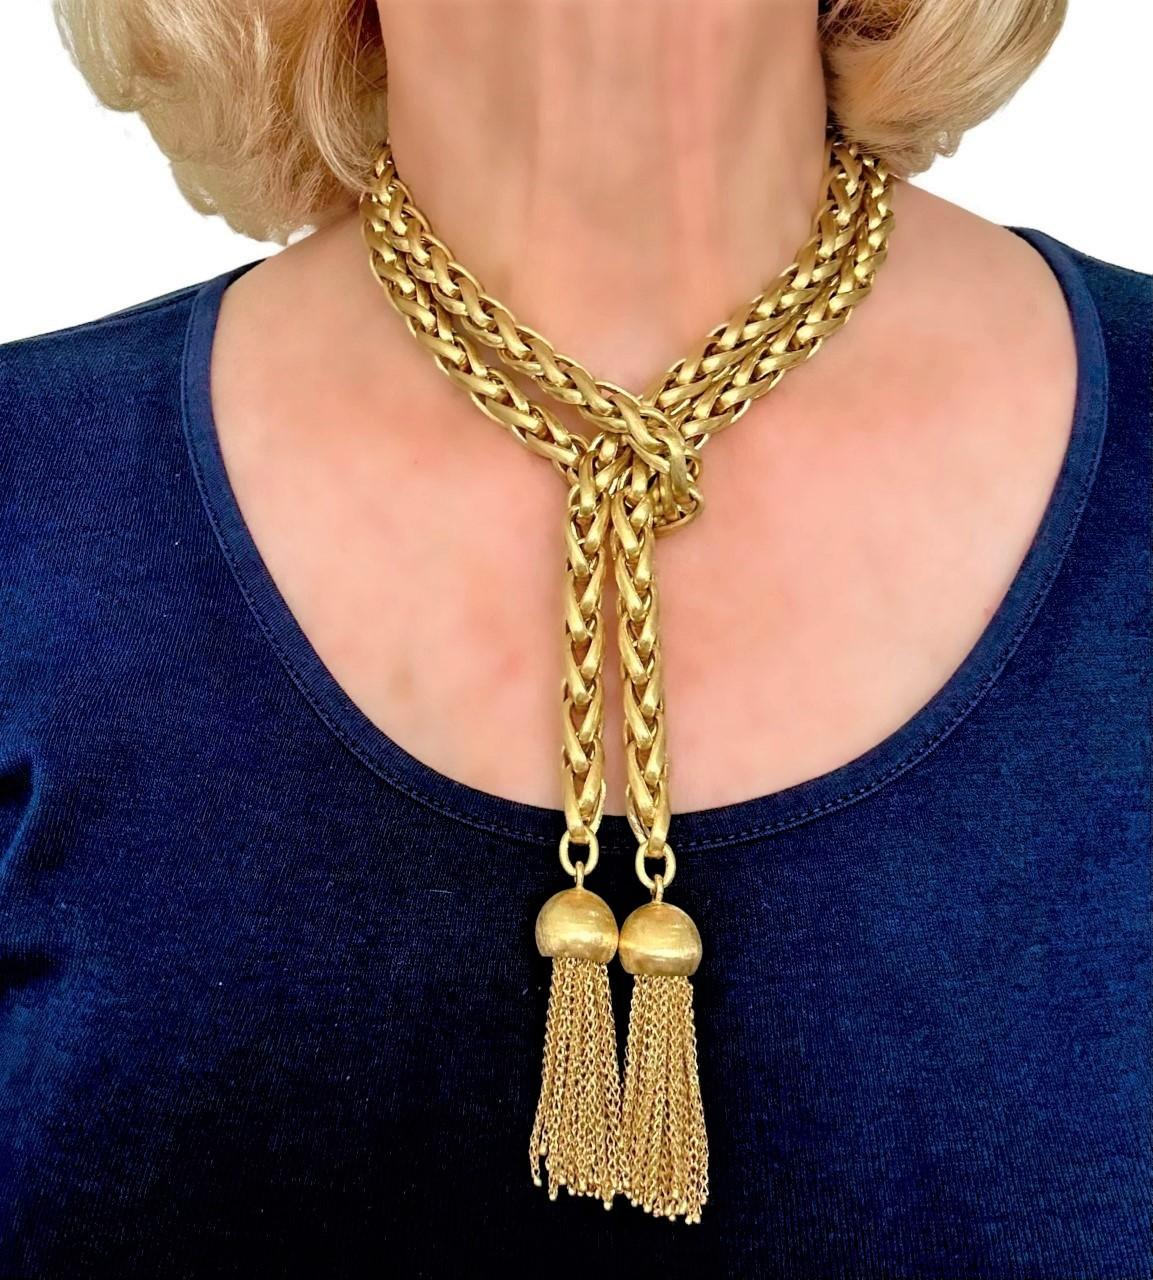 Versatile Long 18k Satin Finish Yellow Gold Lariat Necklace W/Tassels For Sale 4